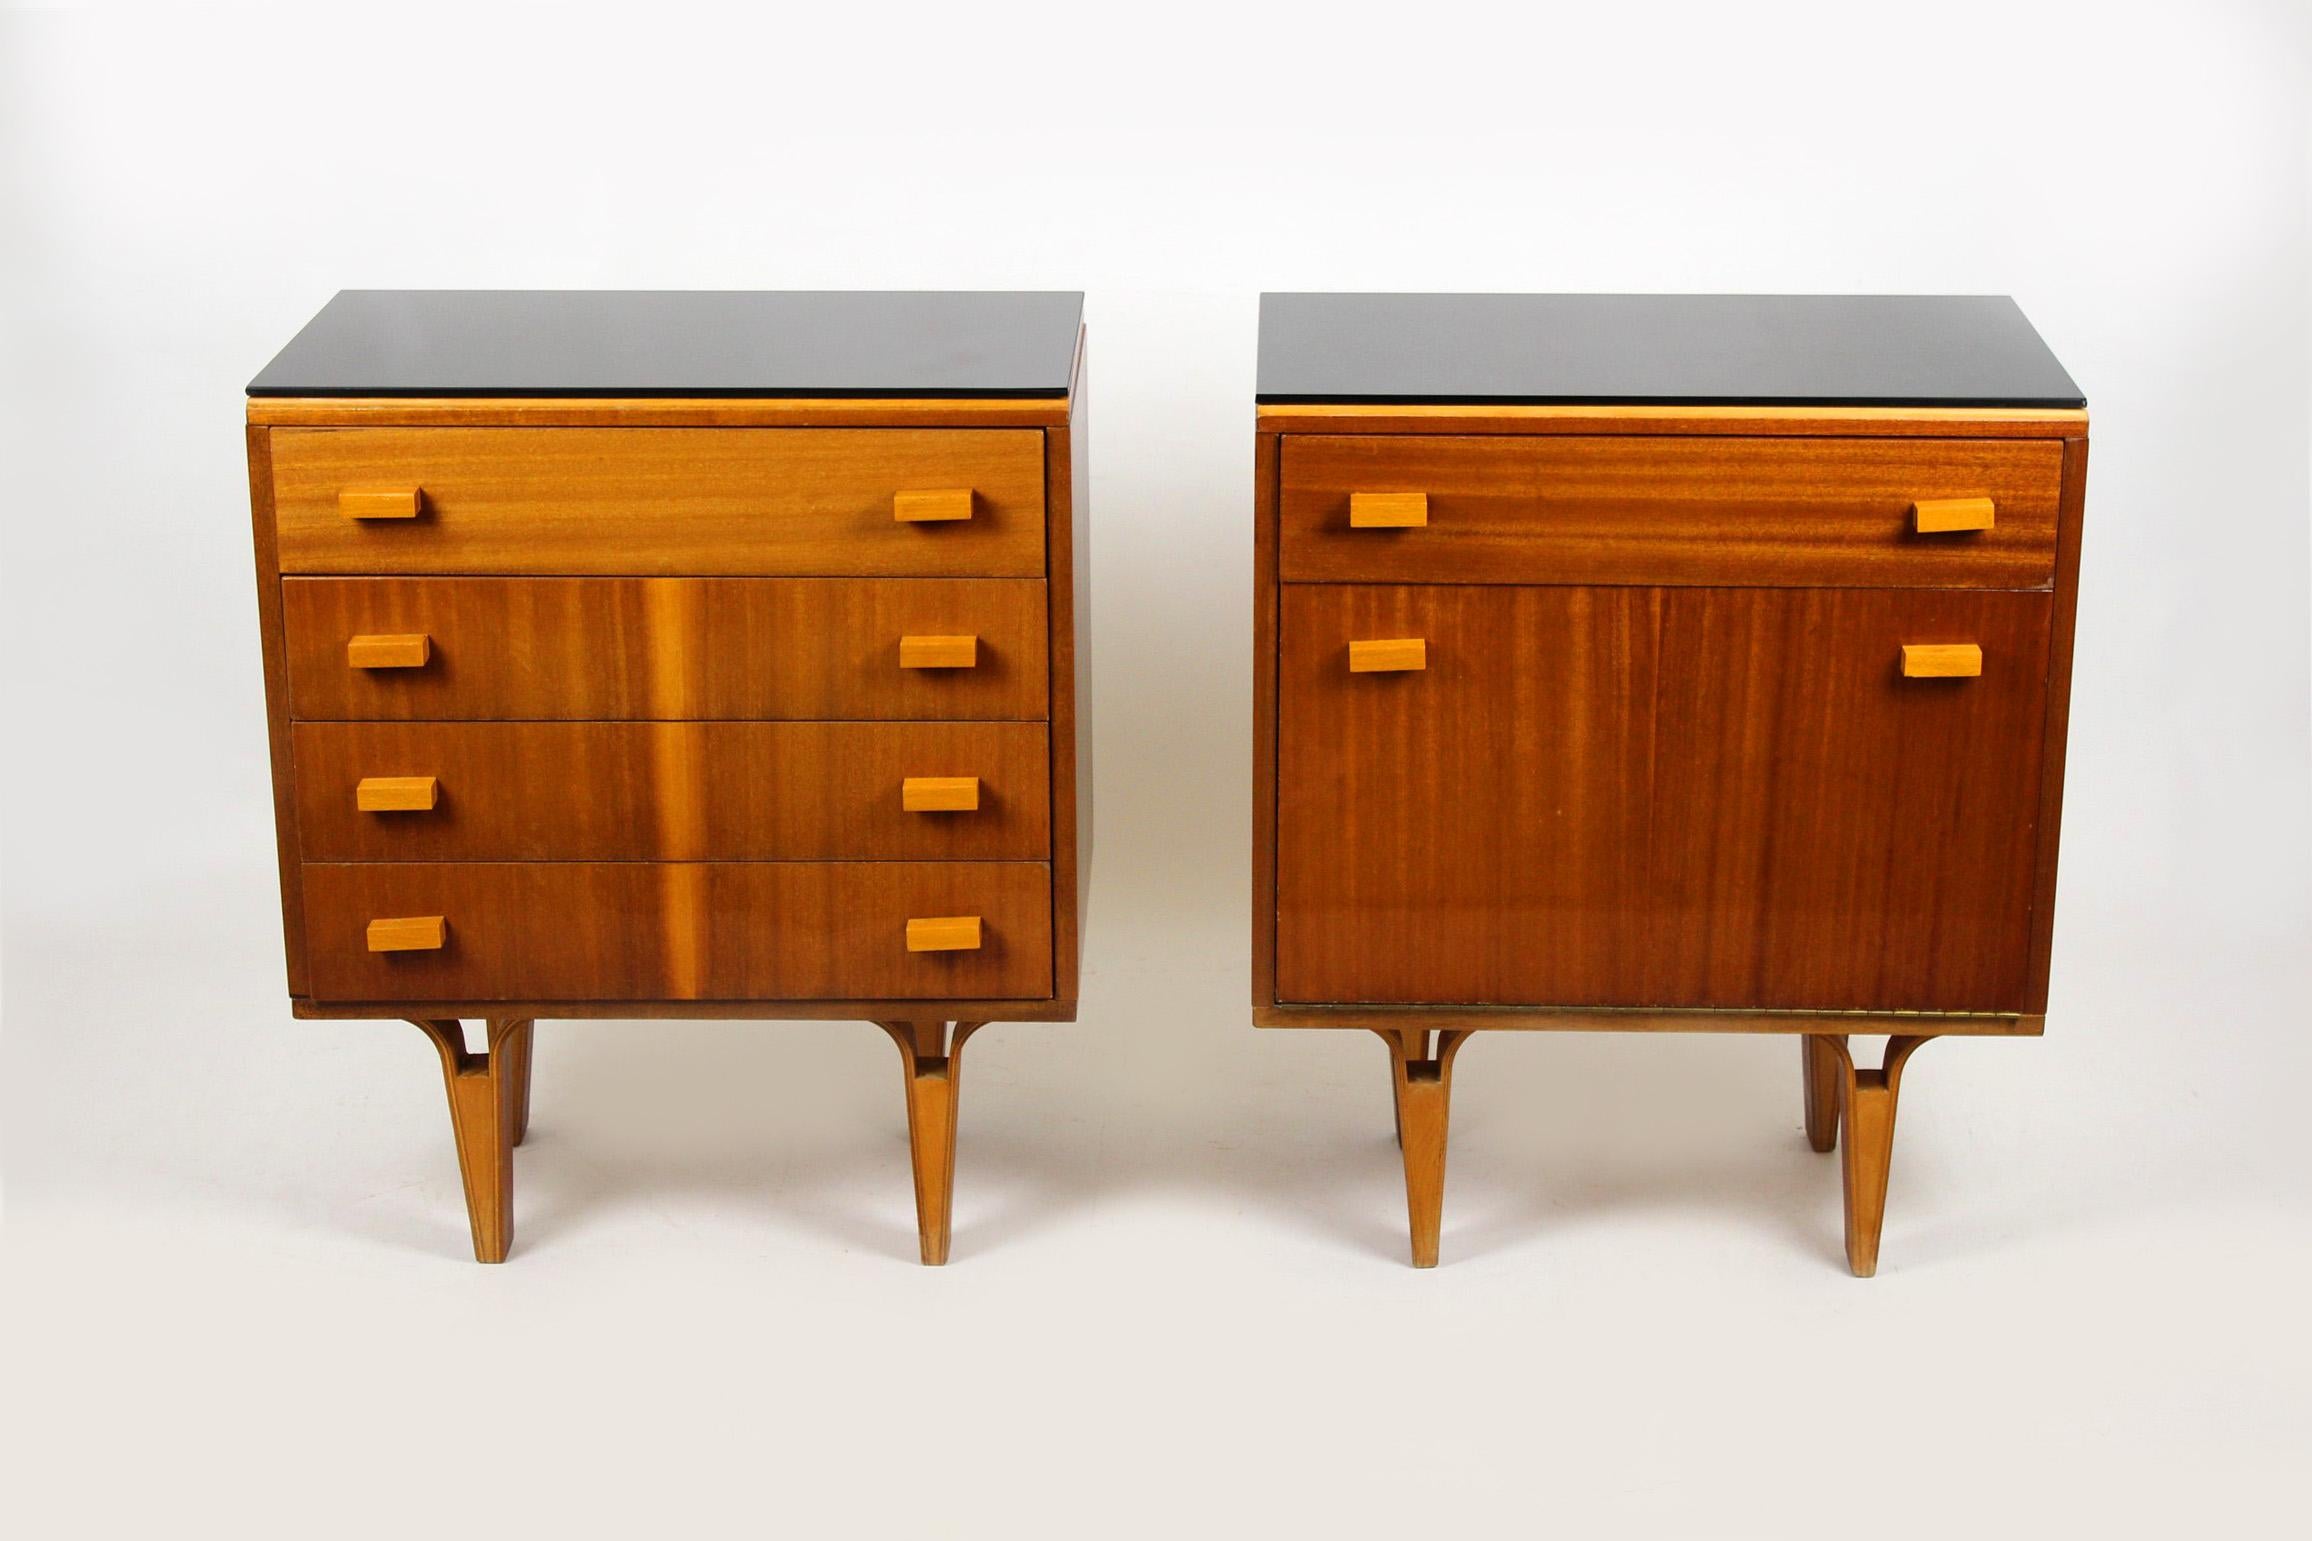 Pair of vintage nightstands, manufactured by Nový domov NP. Produced in the 1960s-1970s in Czechoslovakia. Legs made from bent plywood, black glass tops.